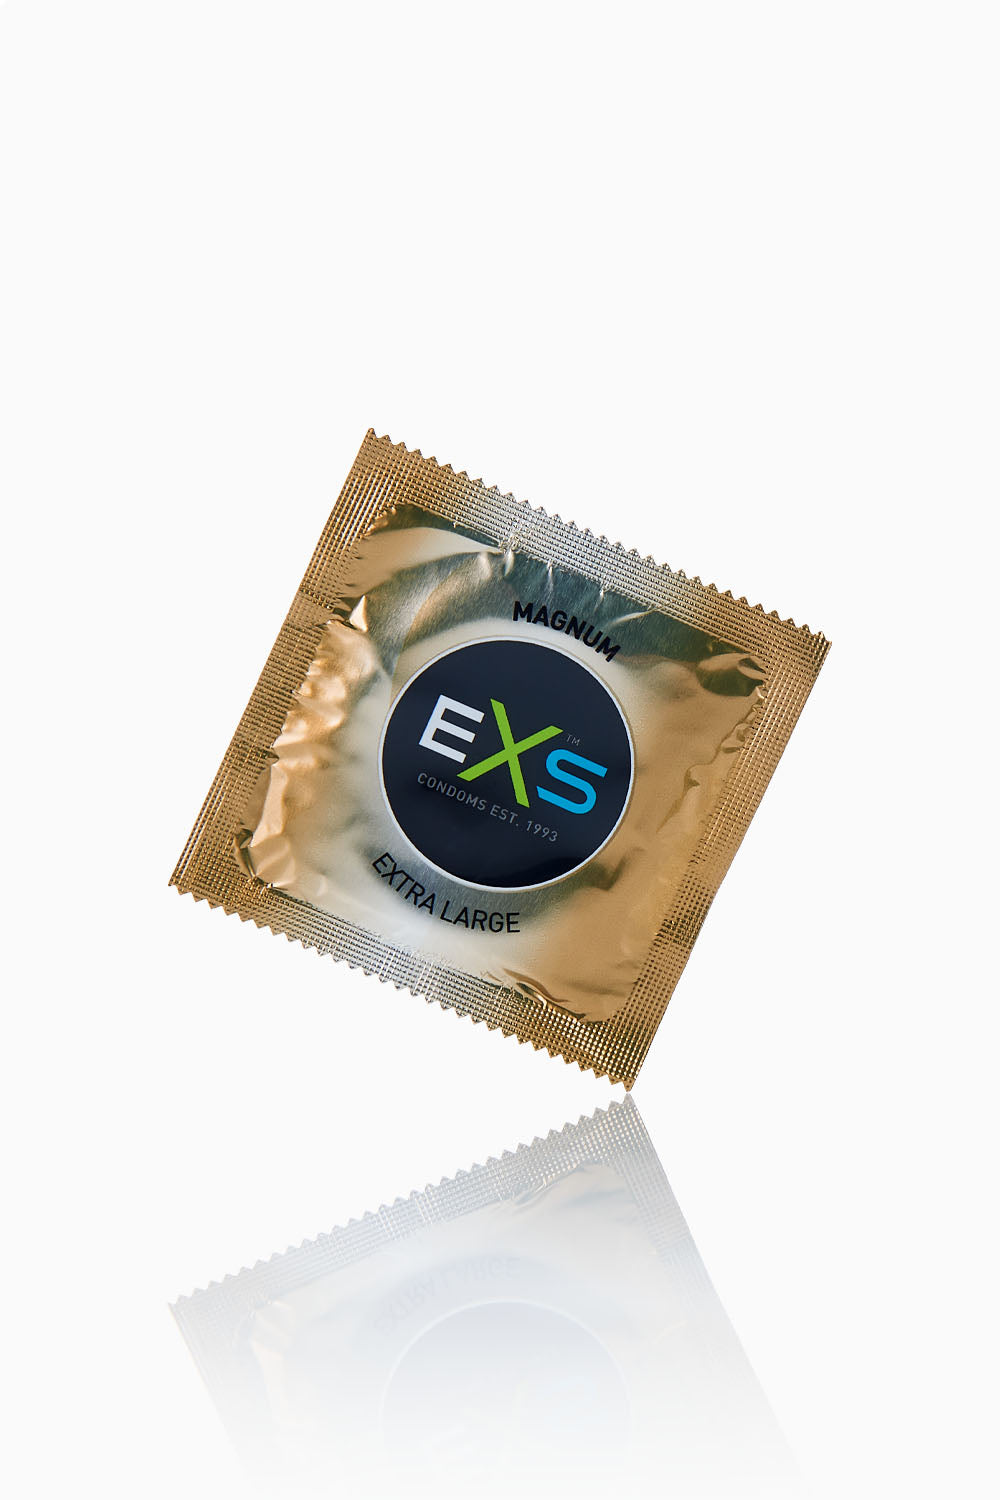 EXS Extra Large Condoms 24 Pack